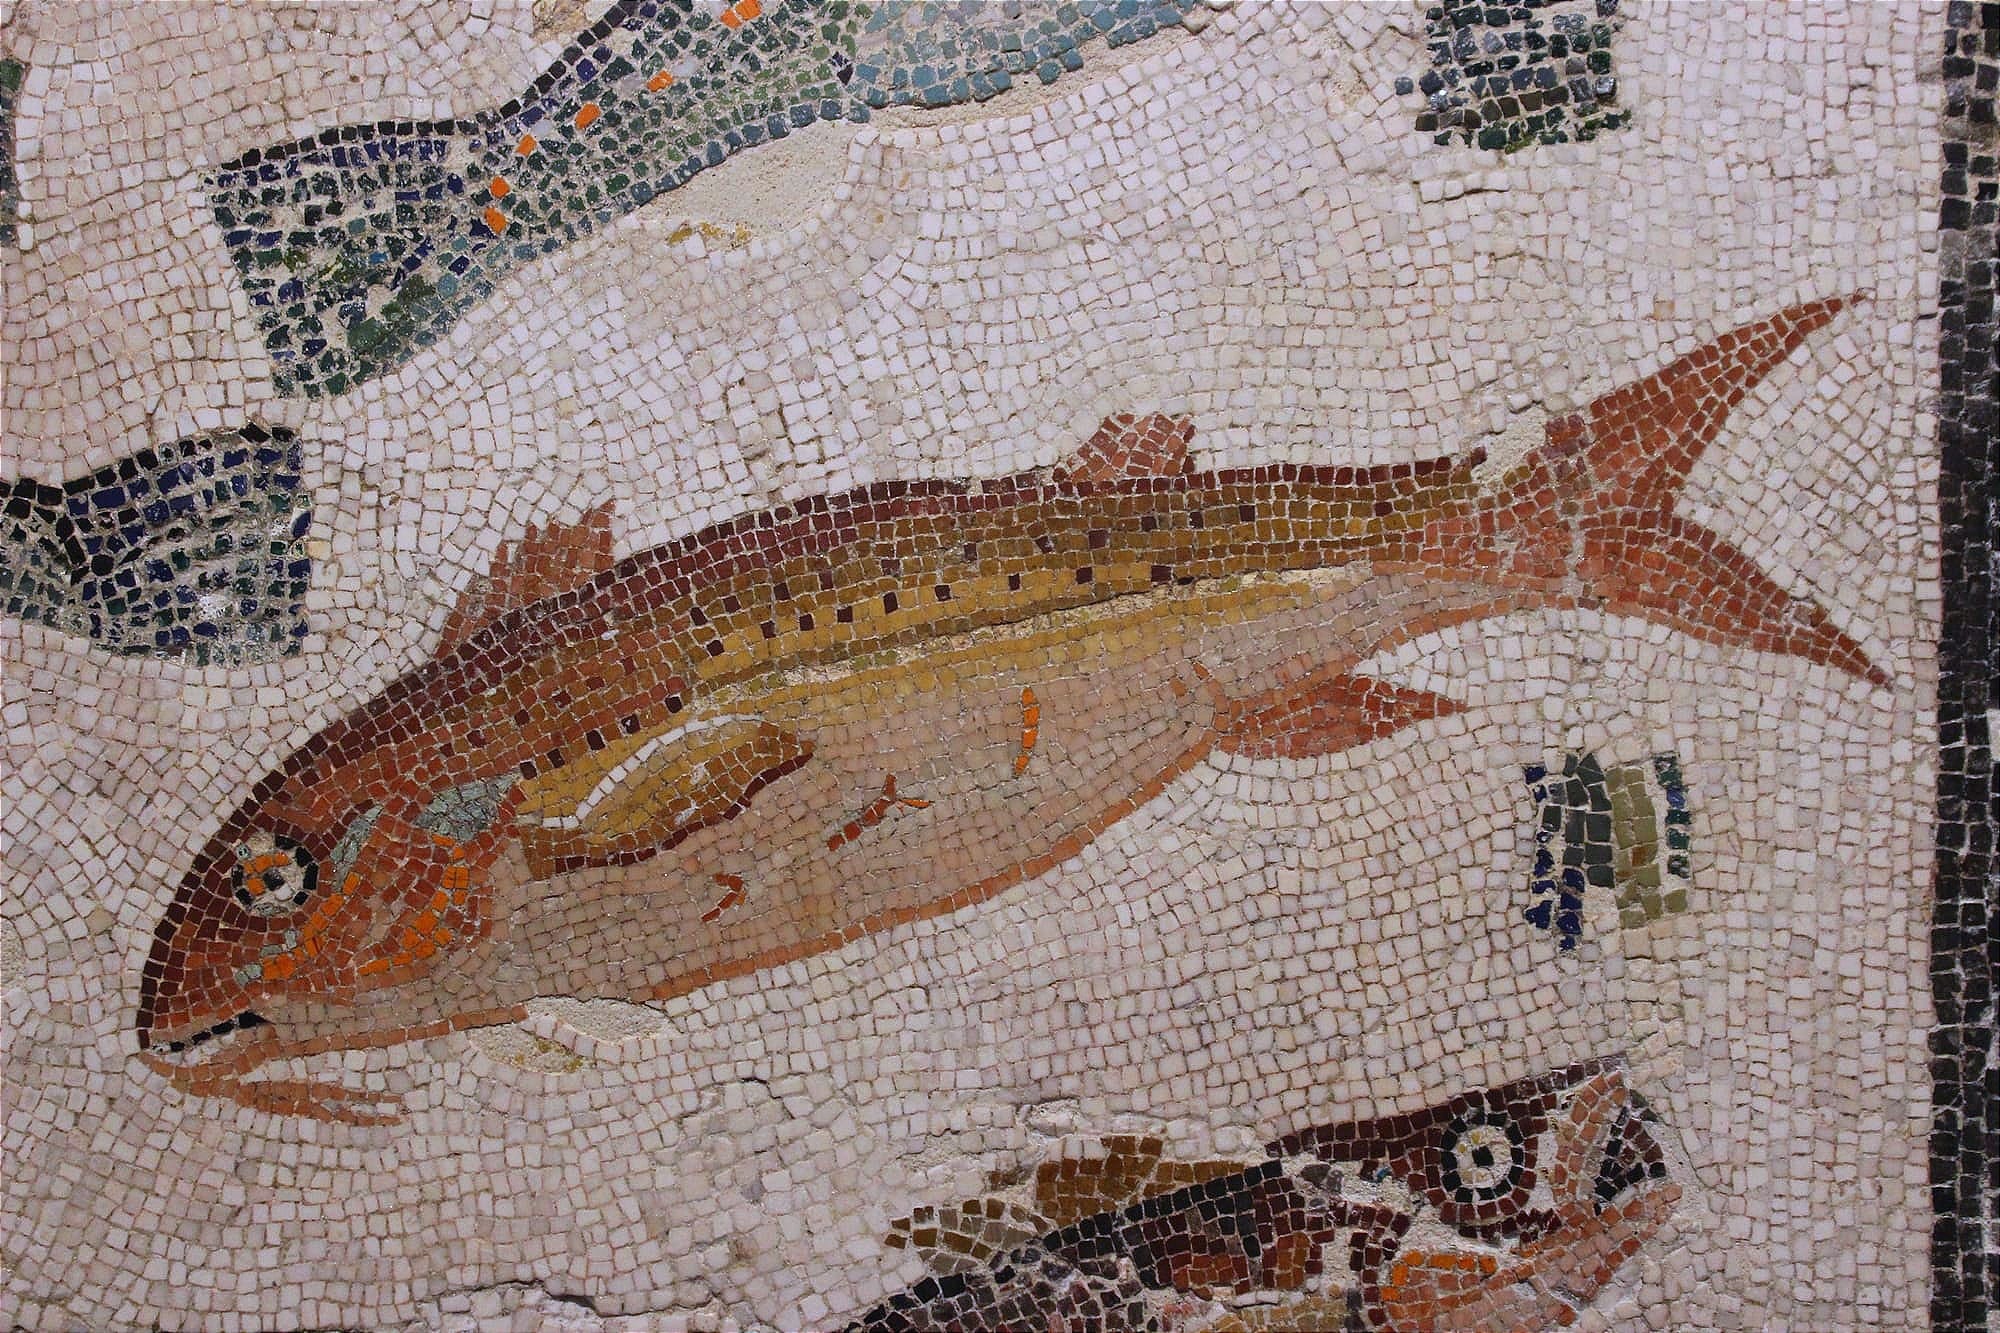 The Red Mullet: Ancient Rome's Top Delicacy